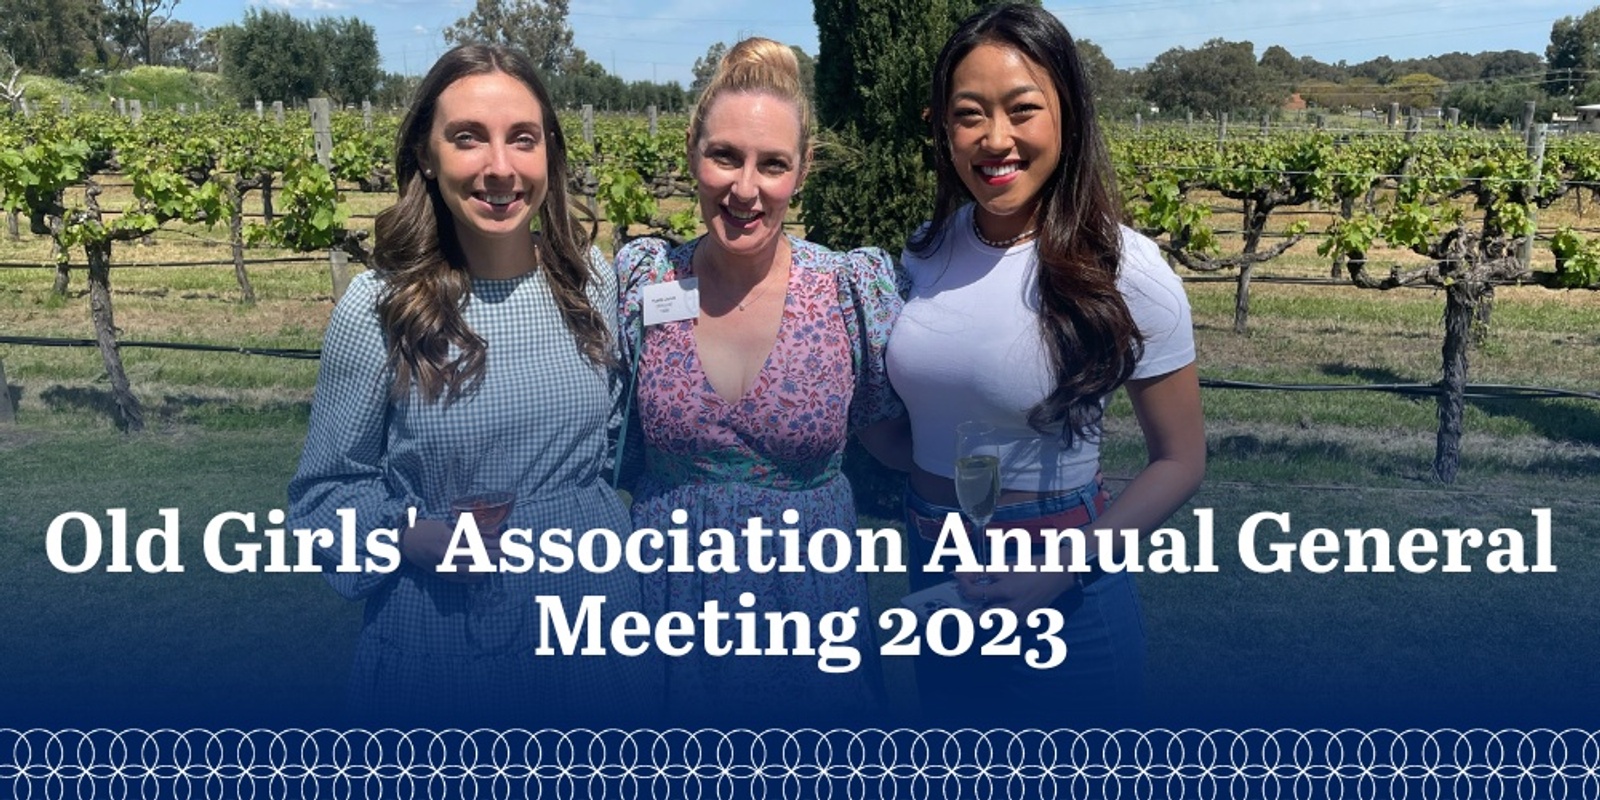 Old Girls Association Annual General Meeting 2023